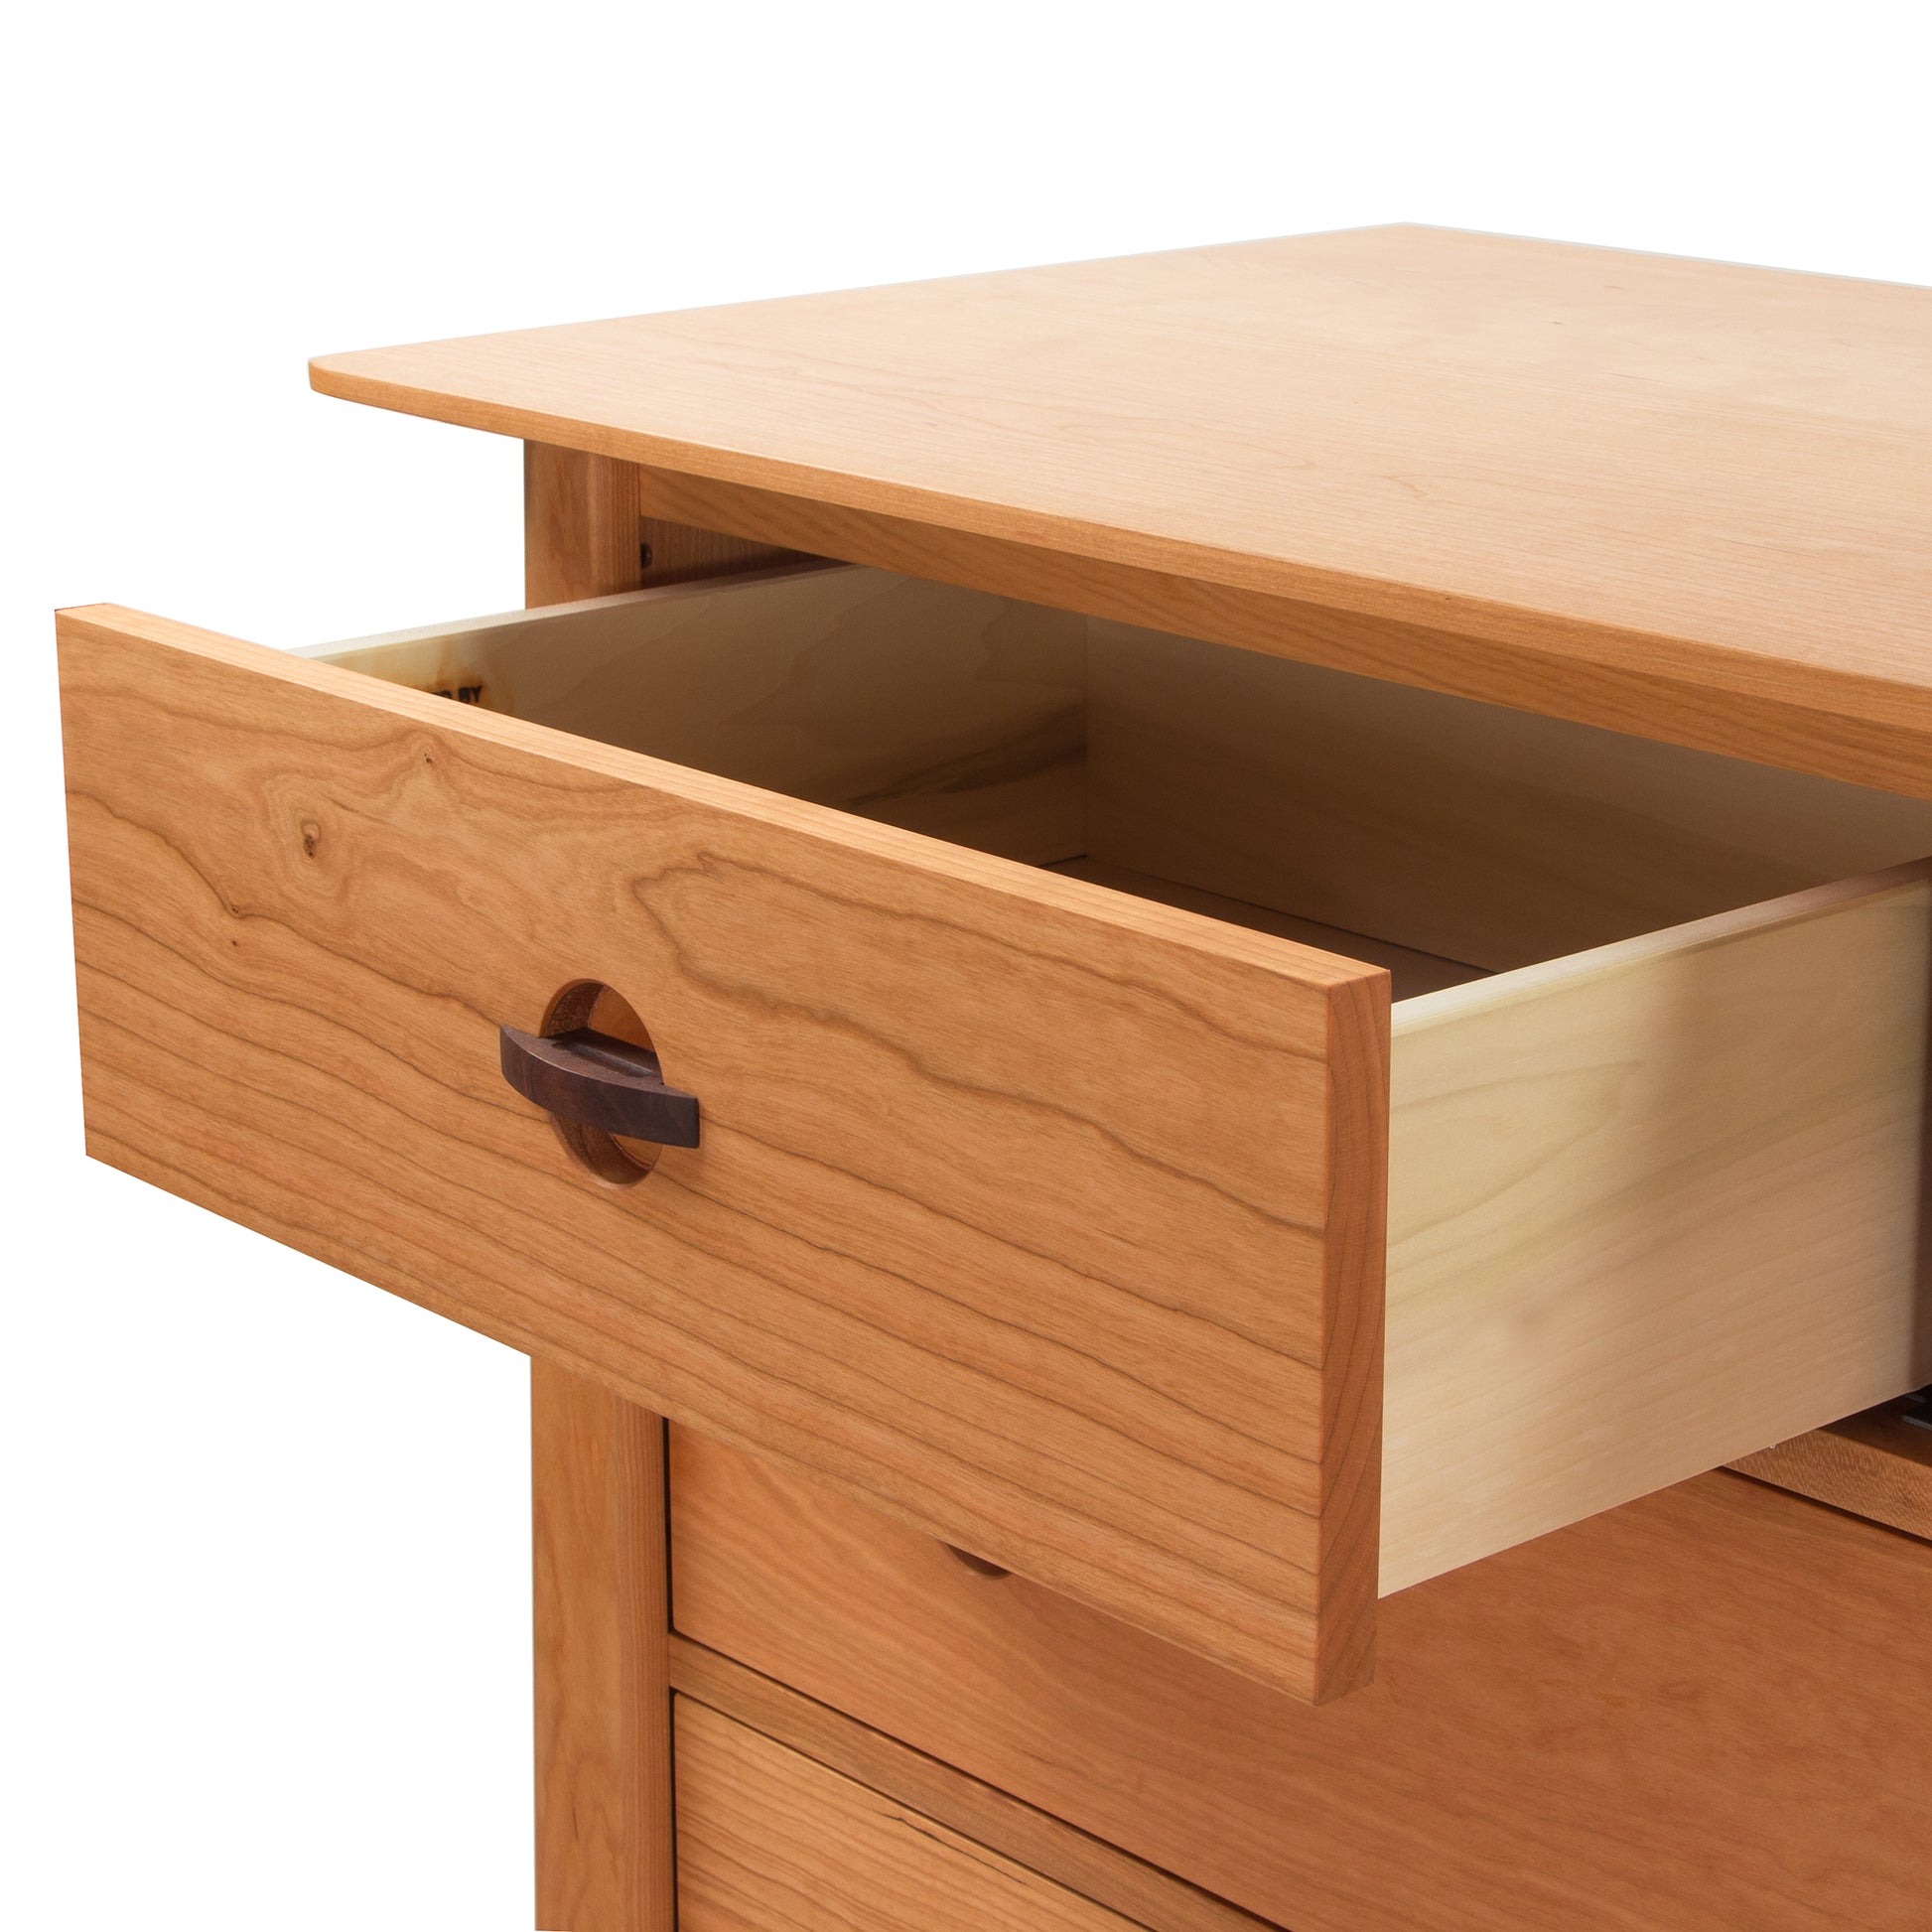 An eco-friendly Cherry Moon 7-Drawer Dresser handmade in Vermont with two drawers by Maple Corner Woodworks.